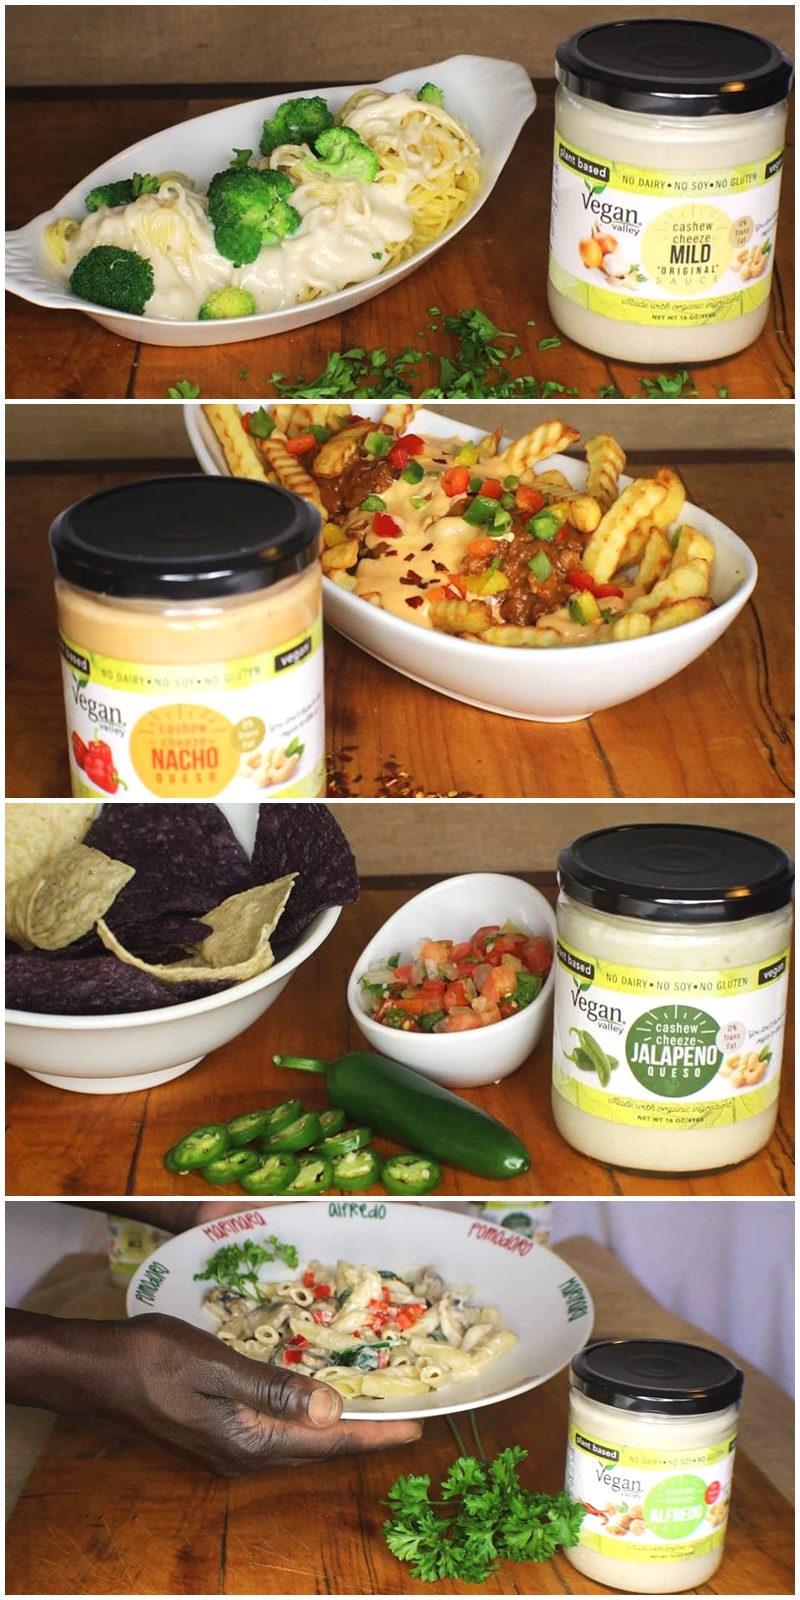 Vegan Valley Cashew Cheeze Sauces Reviews and Information! Dairy-free, Gluten-free, Soy-free, Vegan, and Paleo cheese alternatives. We have ingredients, availability, and more